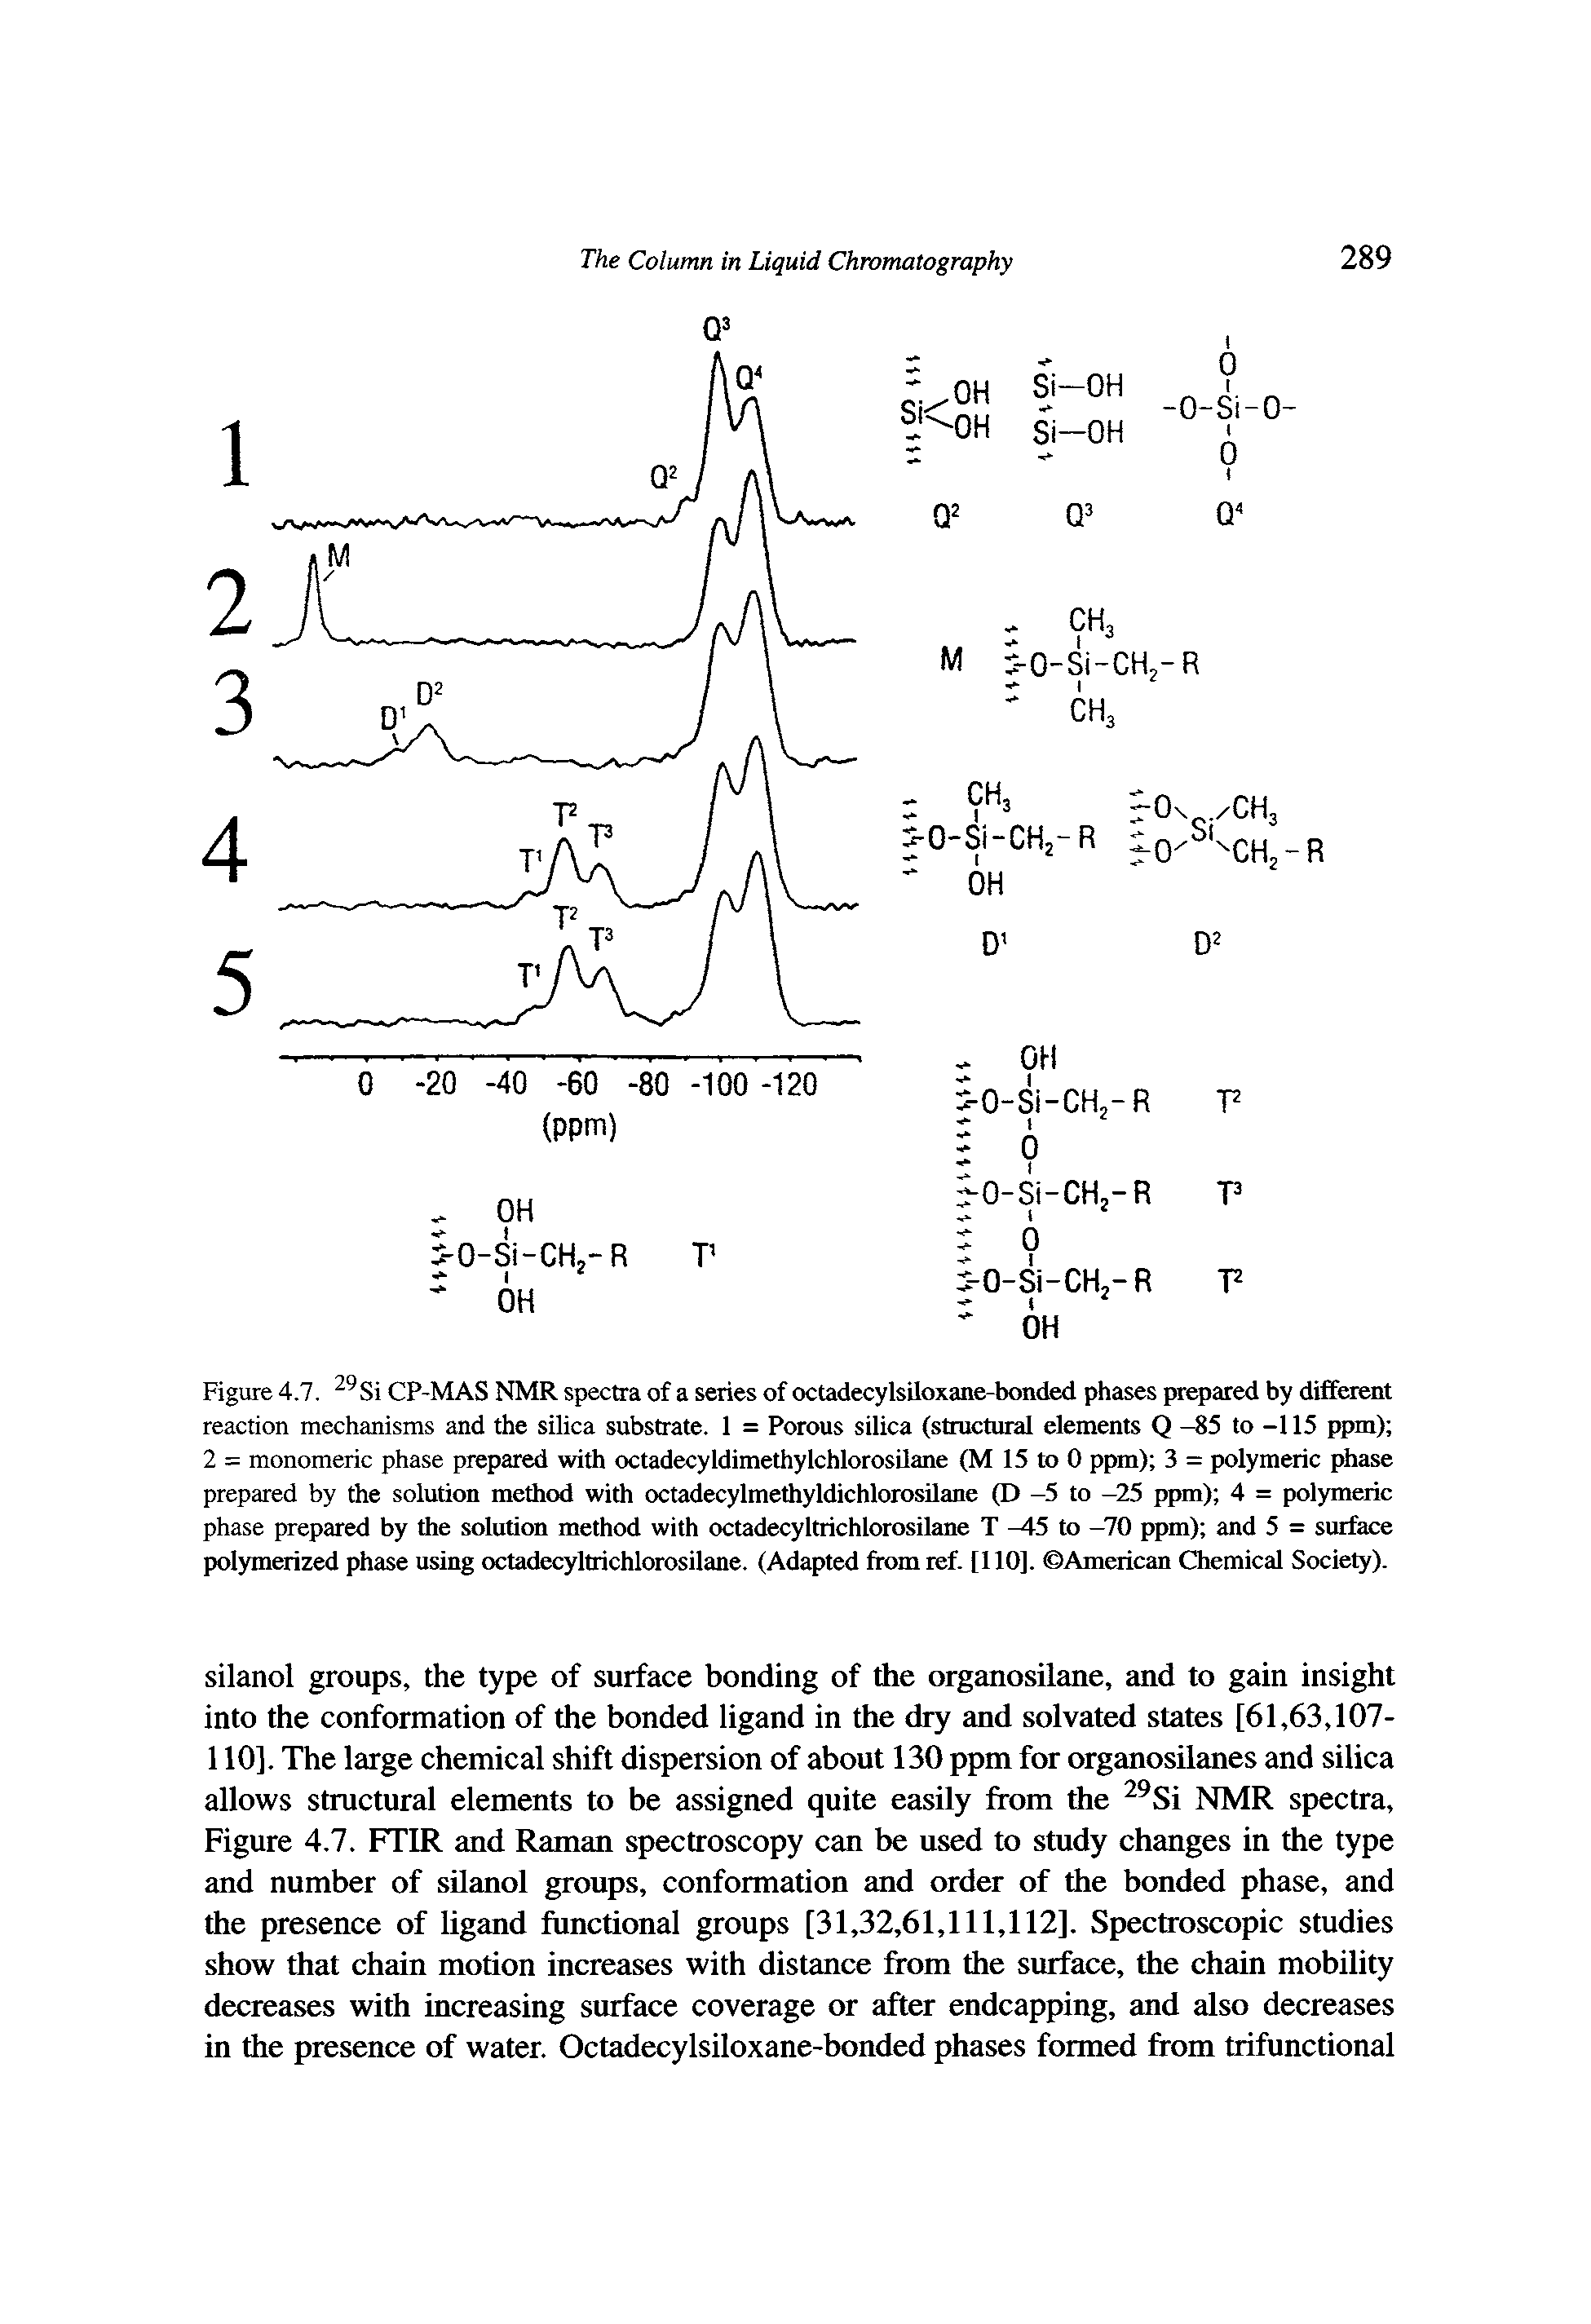 Figure 4.7. CP-MAS NMR spectra of a series of octadecylsiloxane-bonded phases prepared by different reaction mechanisms and the silica substrate. 1 = Porous silica (structural elements Q -85 to -115 ppm) 2 = monomeric phase prepared with octadecyldimethylchlorosUane (M 15 to 0 ppm) 3 = polymeric phase prepared by the solution method with octadecylmethyldichlorosilane (D -5 to -25 ppm) 4 = polymeric phase prepared by the solution method with octadecyltrichlorosilane T 5 to -70 ppm) and 5 = surface polymerized phase using octadecyltrichlorosilane. (Adapted from ref. [110]. American Chemical Society).